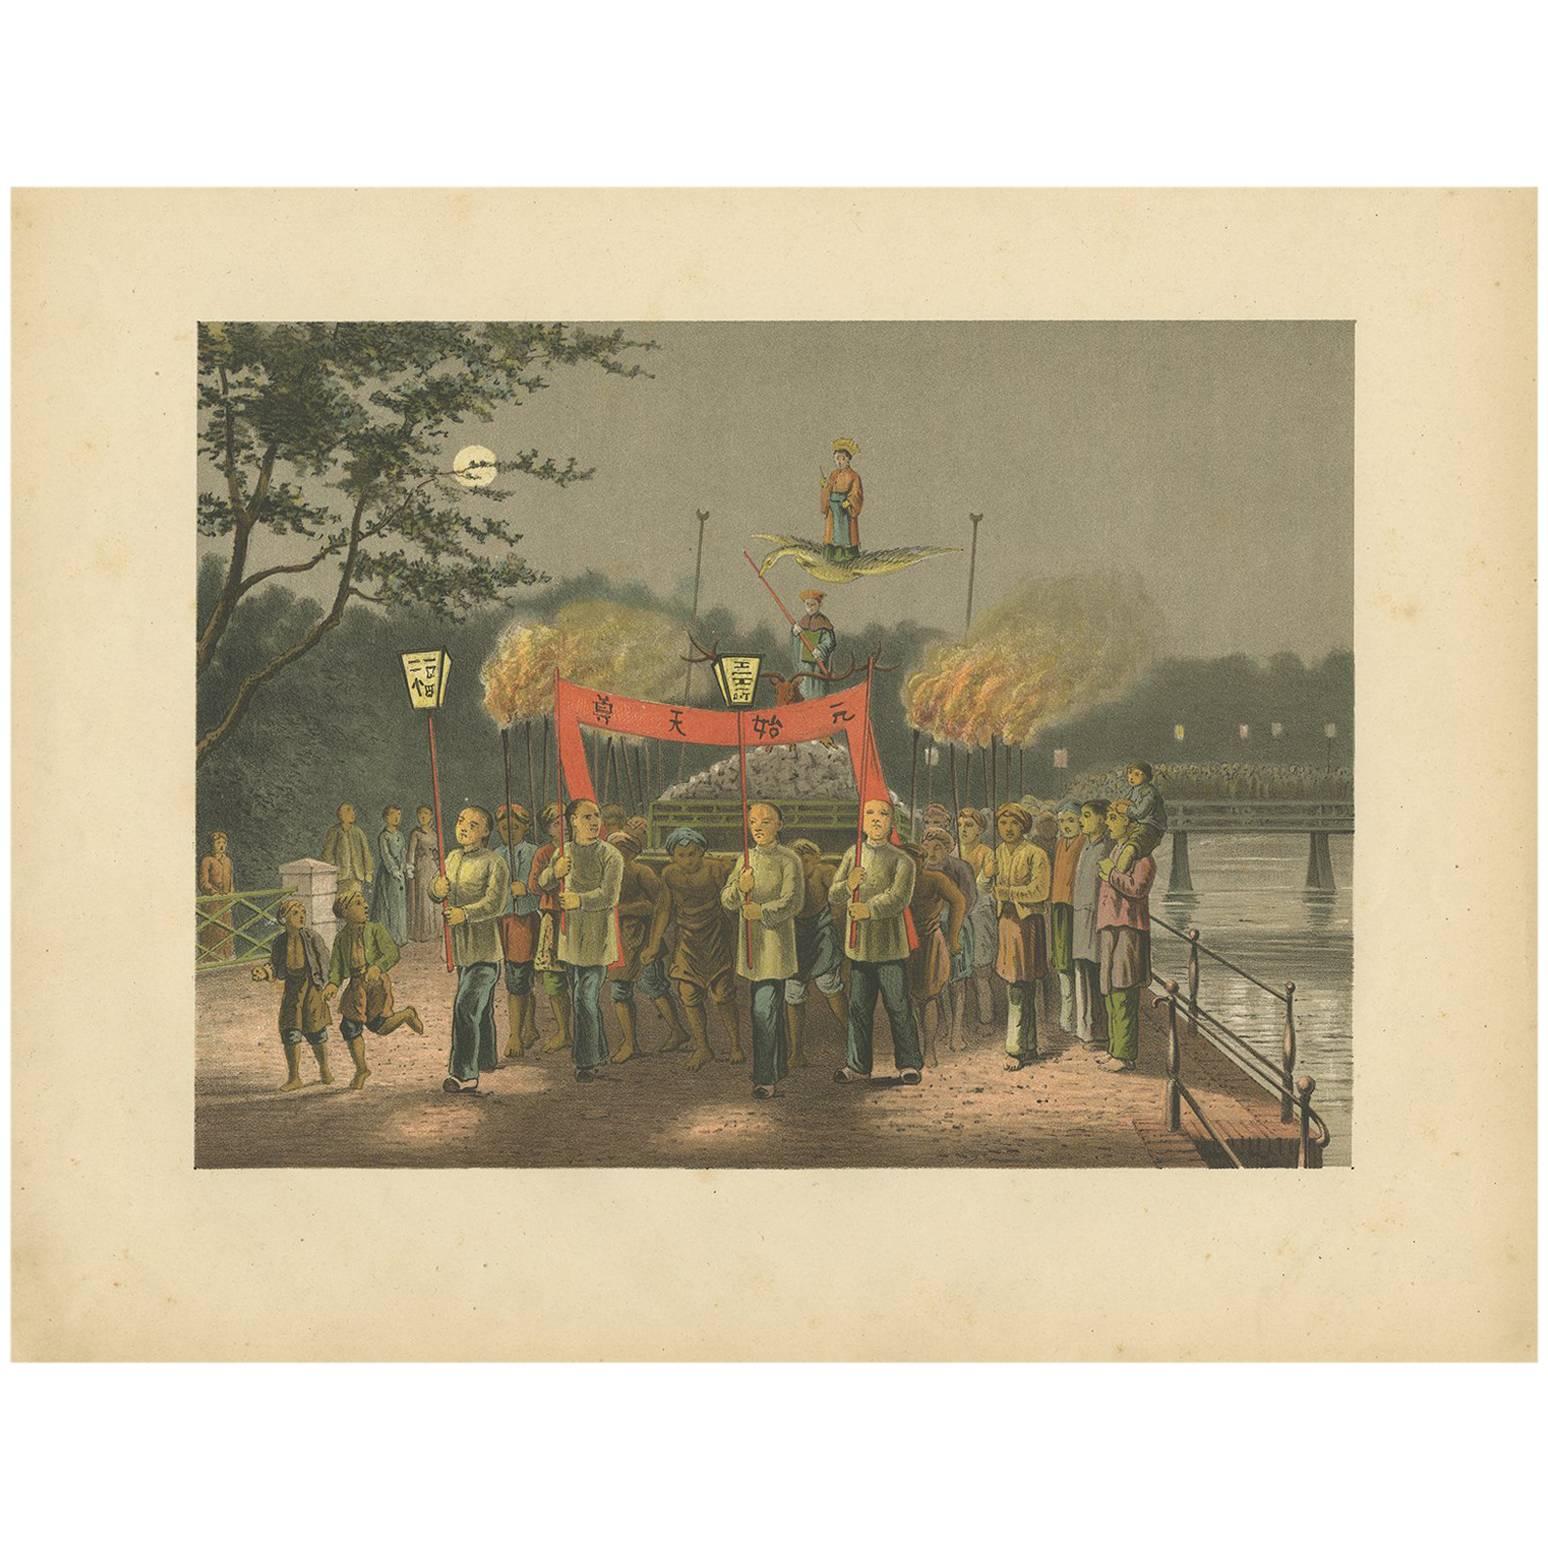 Antique Print of a Ceremony in Batavia by M.T.H. Perelaer, 1888